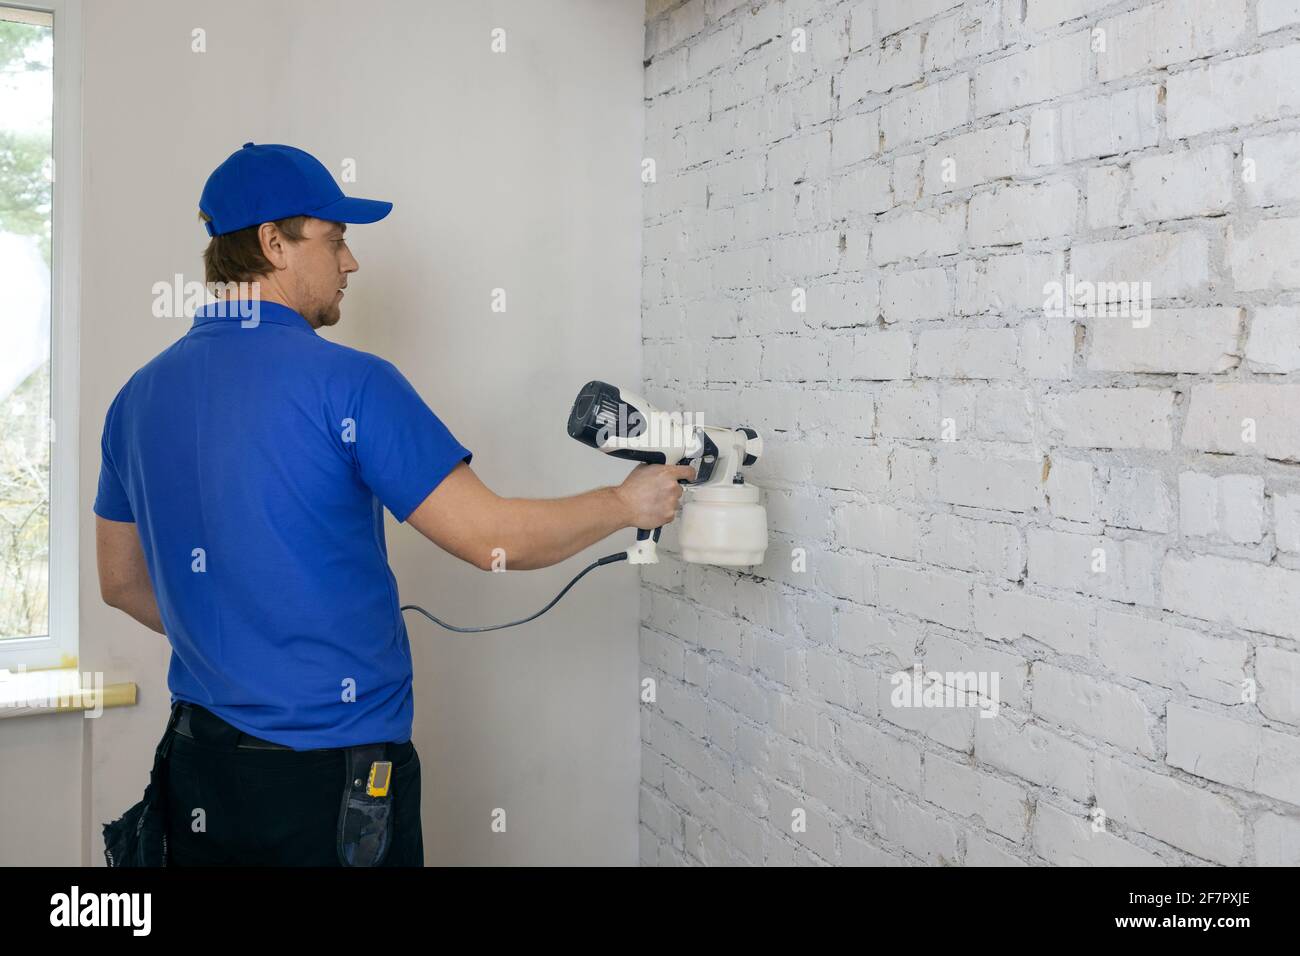 man painting old brick wall in white color with paint sprayer Stock Photo